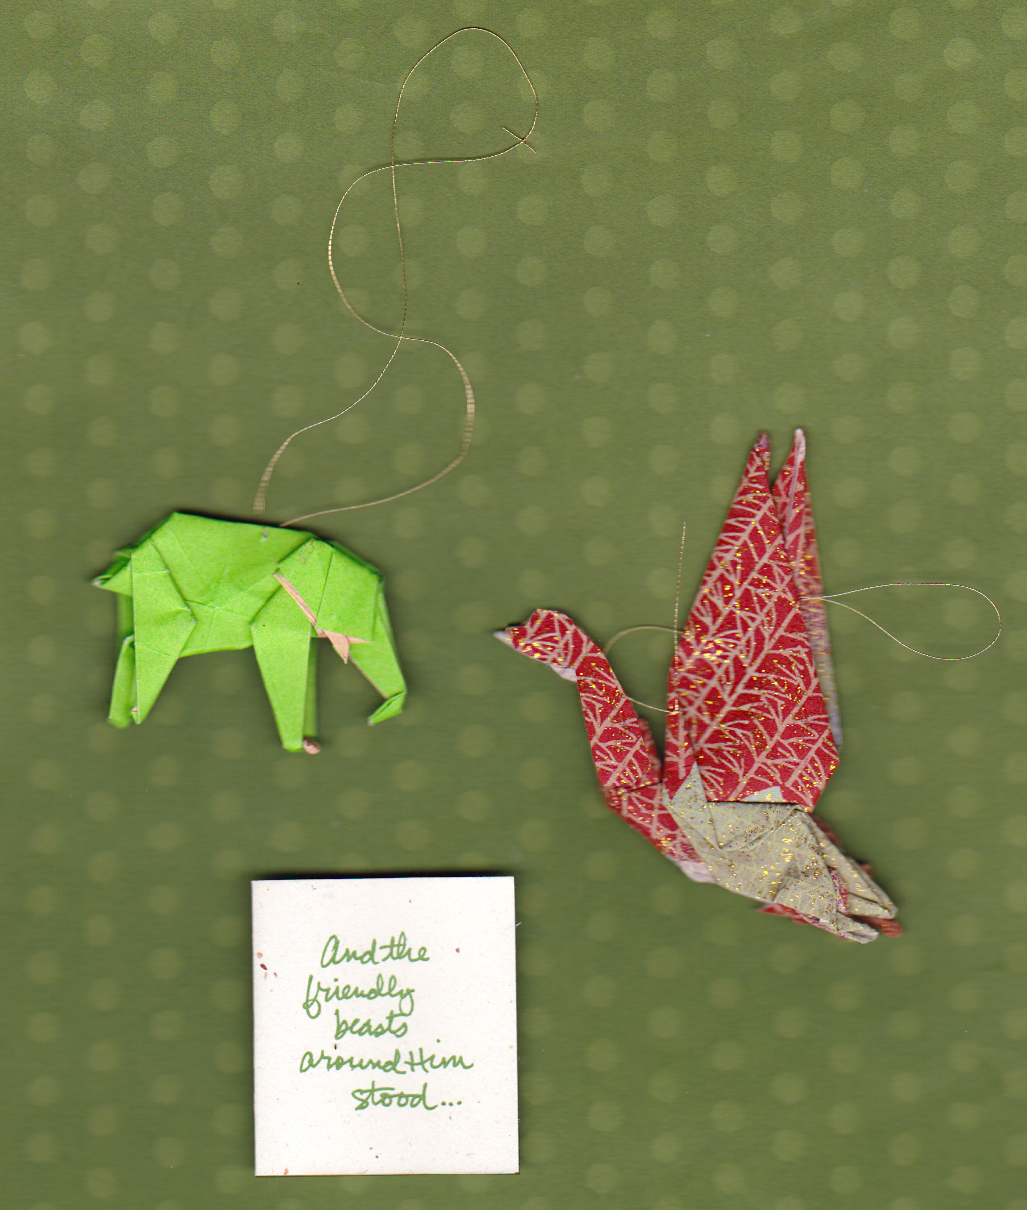 An origami elephant and an origami crane, ornaments with gold thread. "And the friendly beasts around Him stood..."